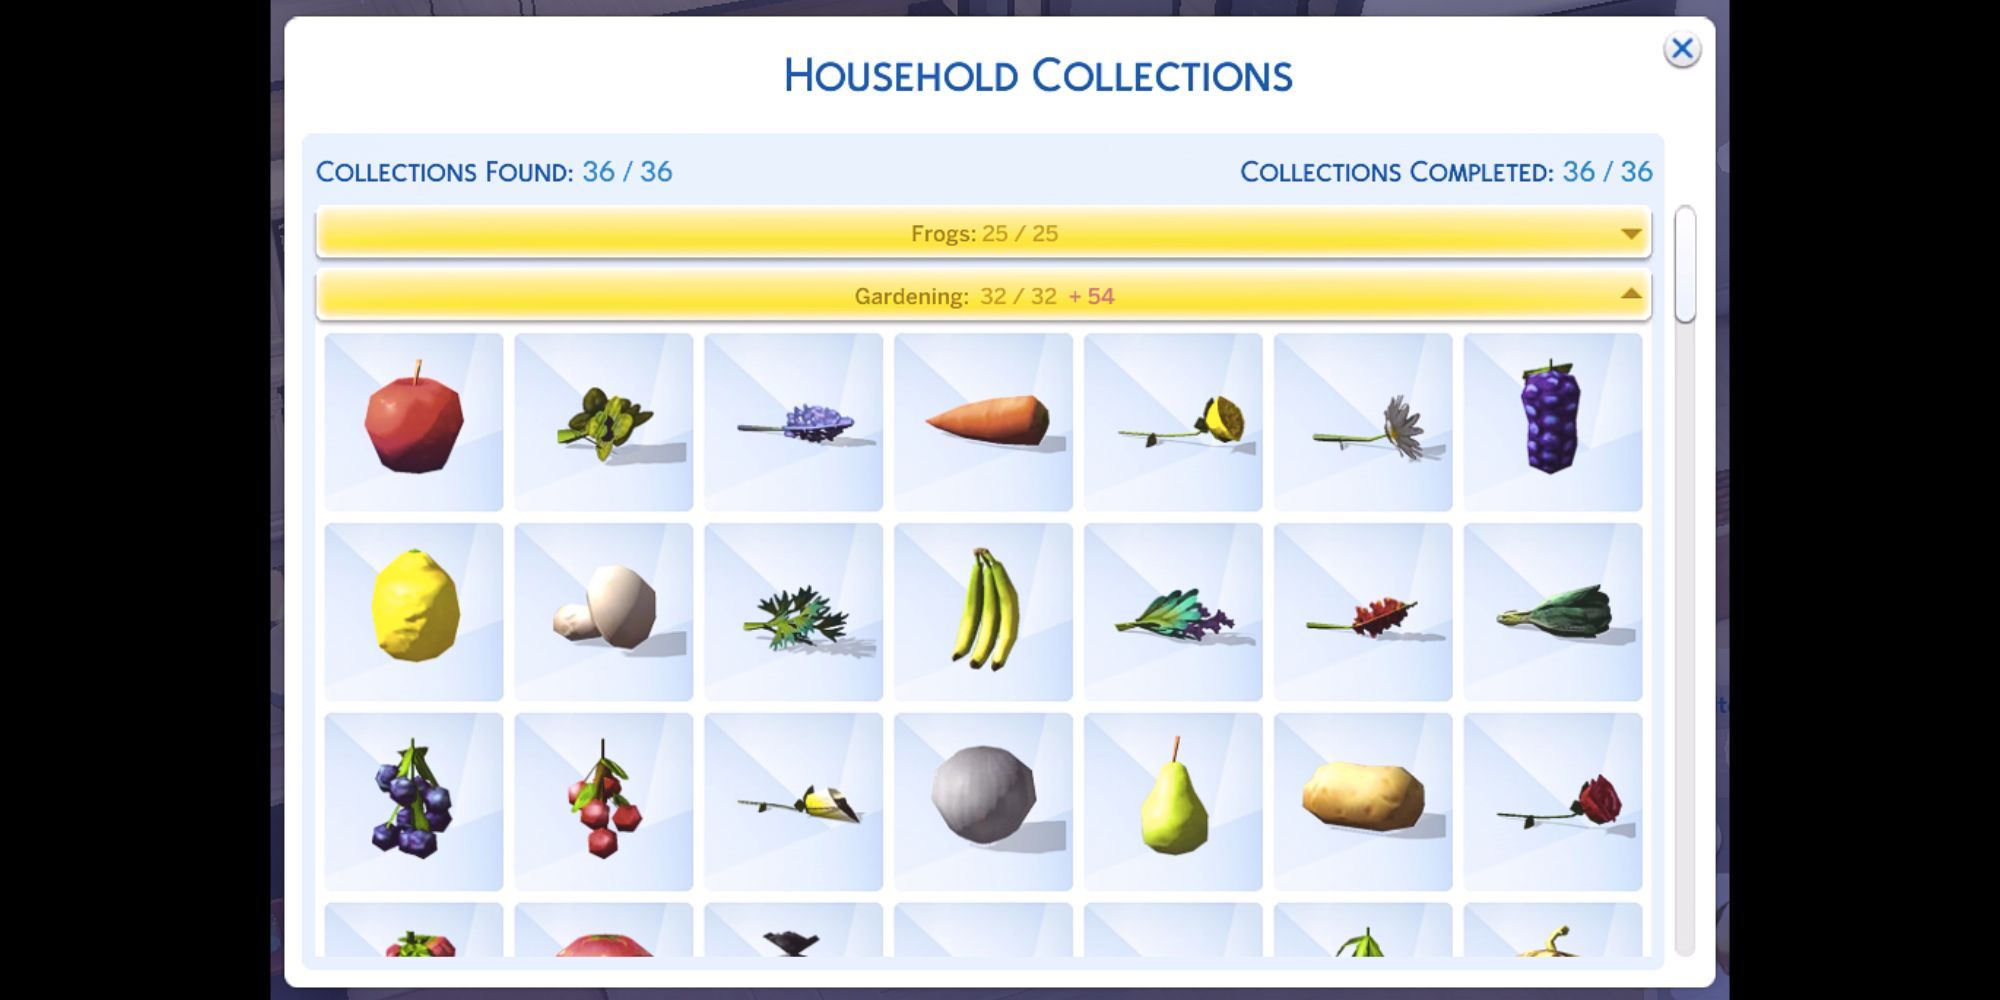 The Sims 4: All Collections Guide